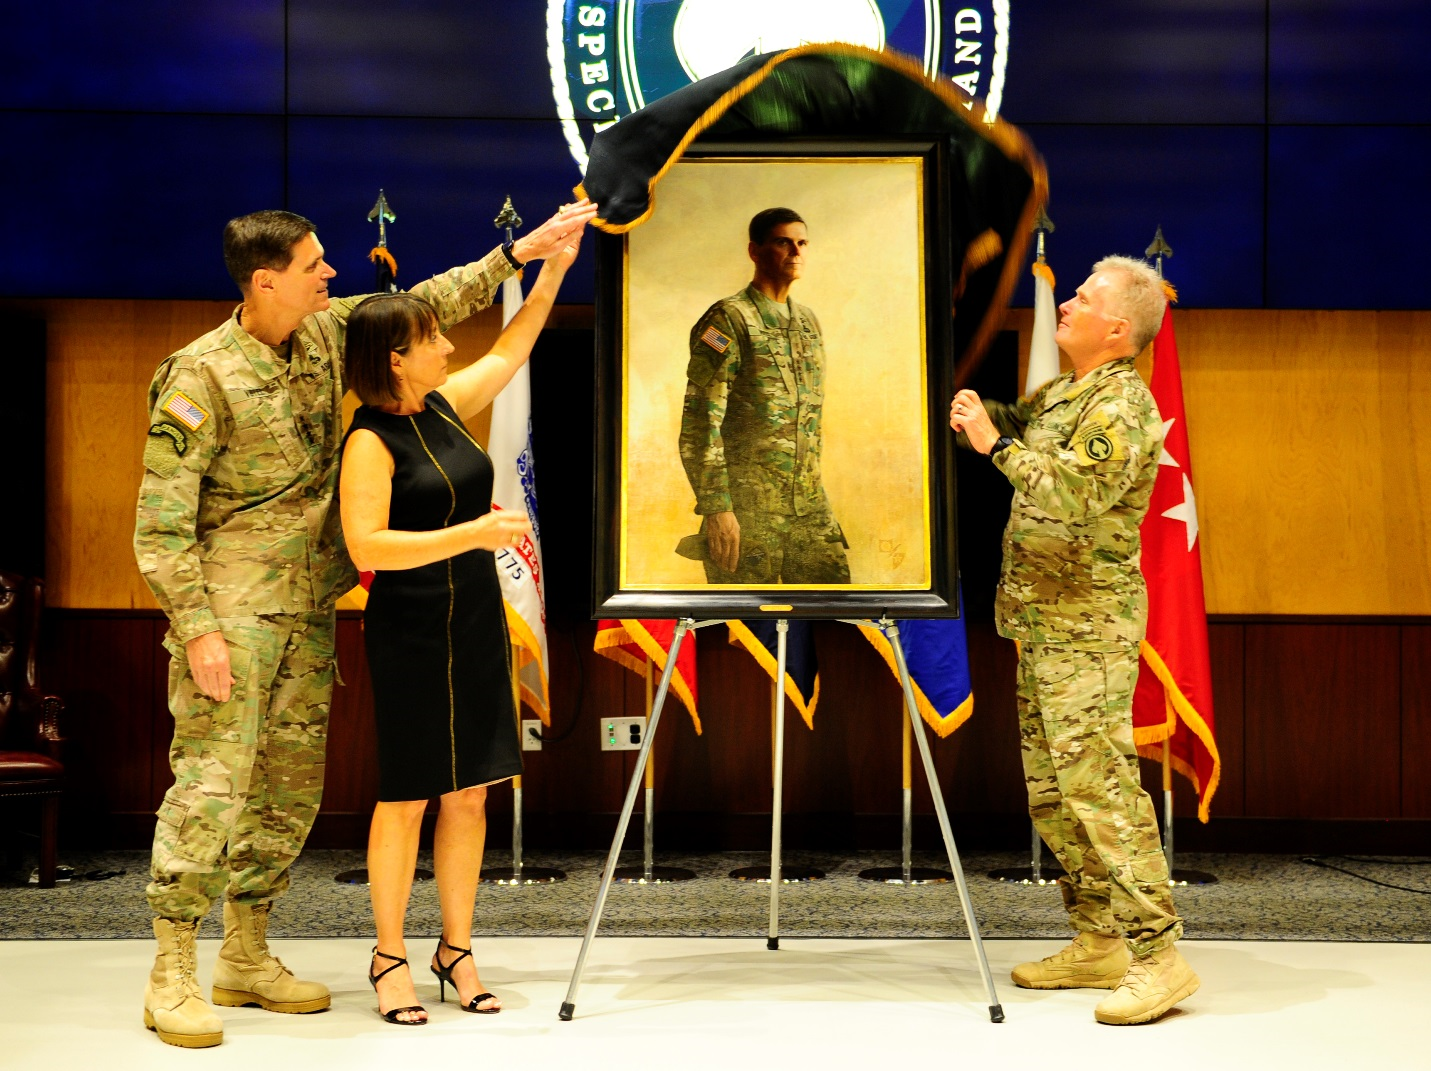 U.S. Special Operations Command unveiled the official portrait of Army Gen. Joseph L. Votel during a ceremony.